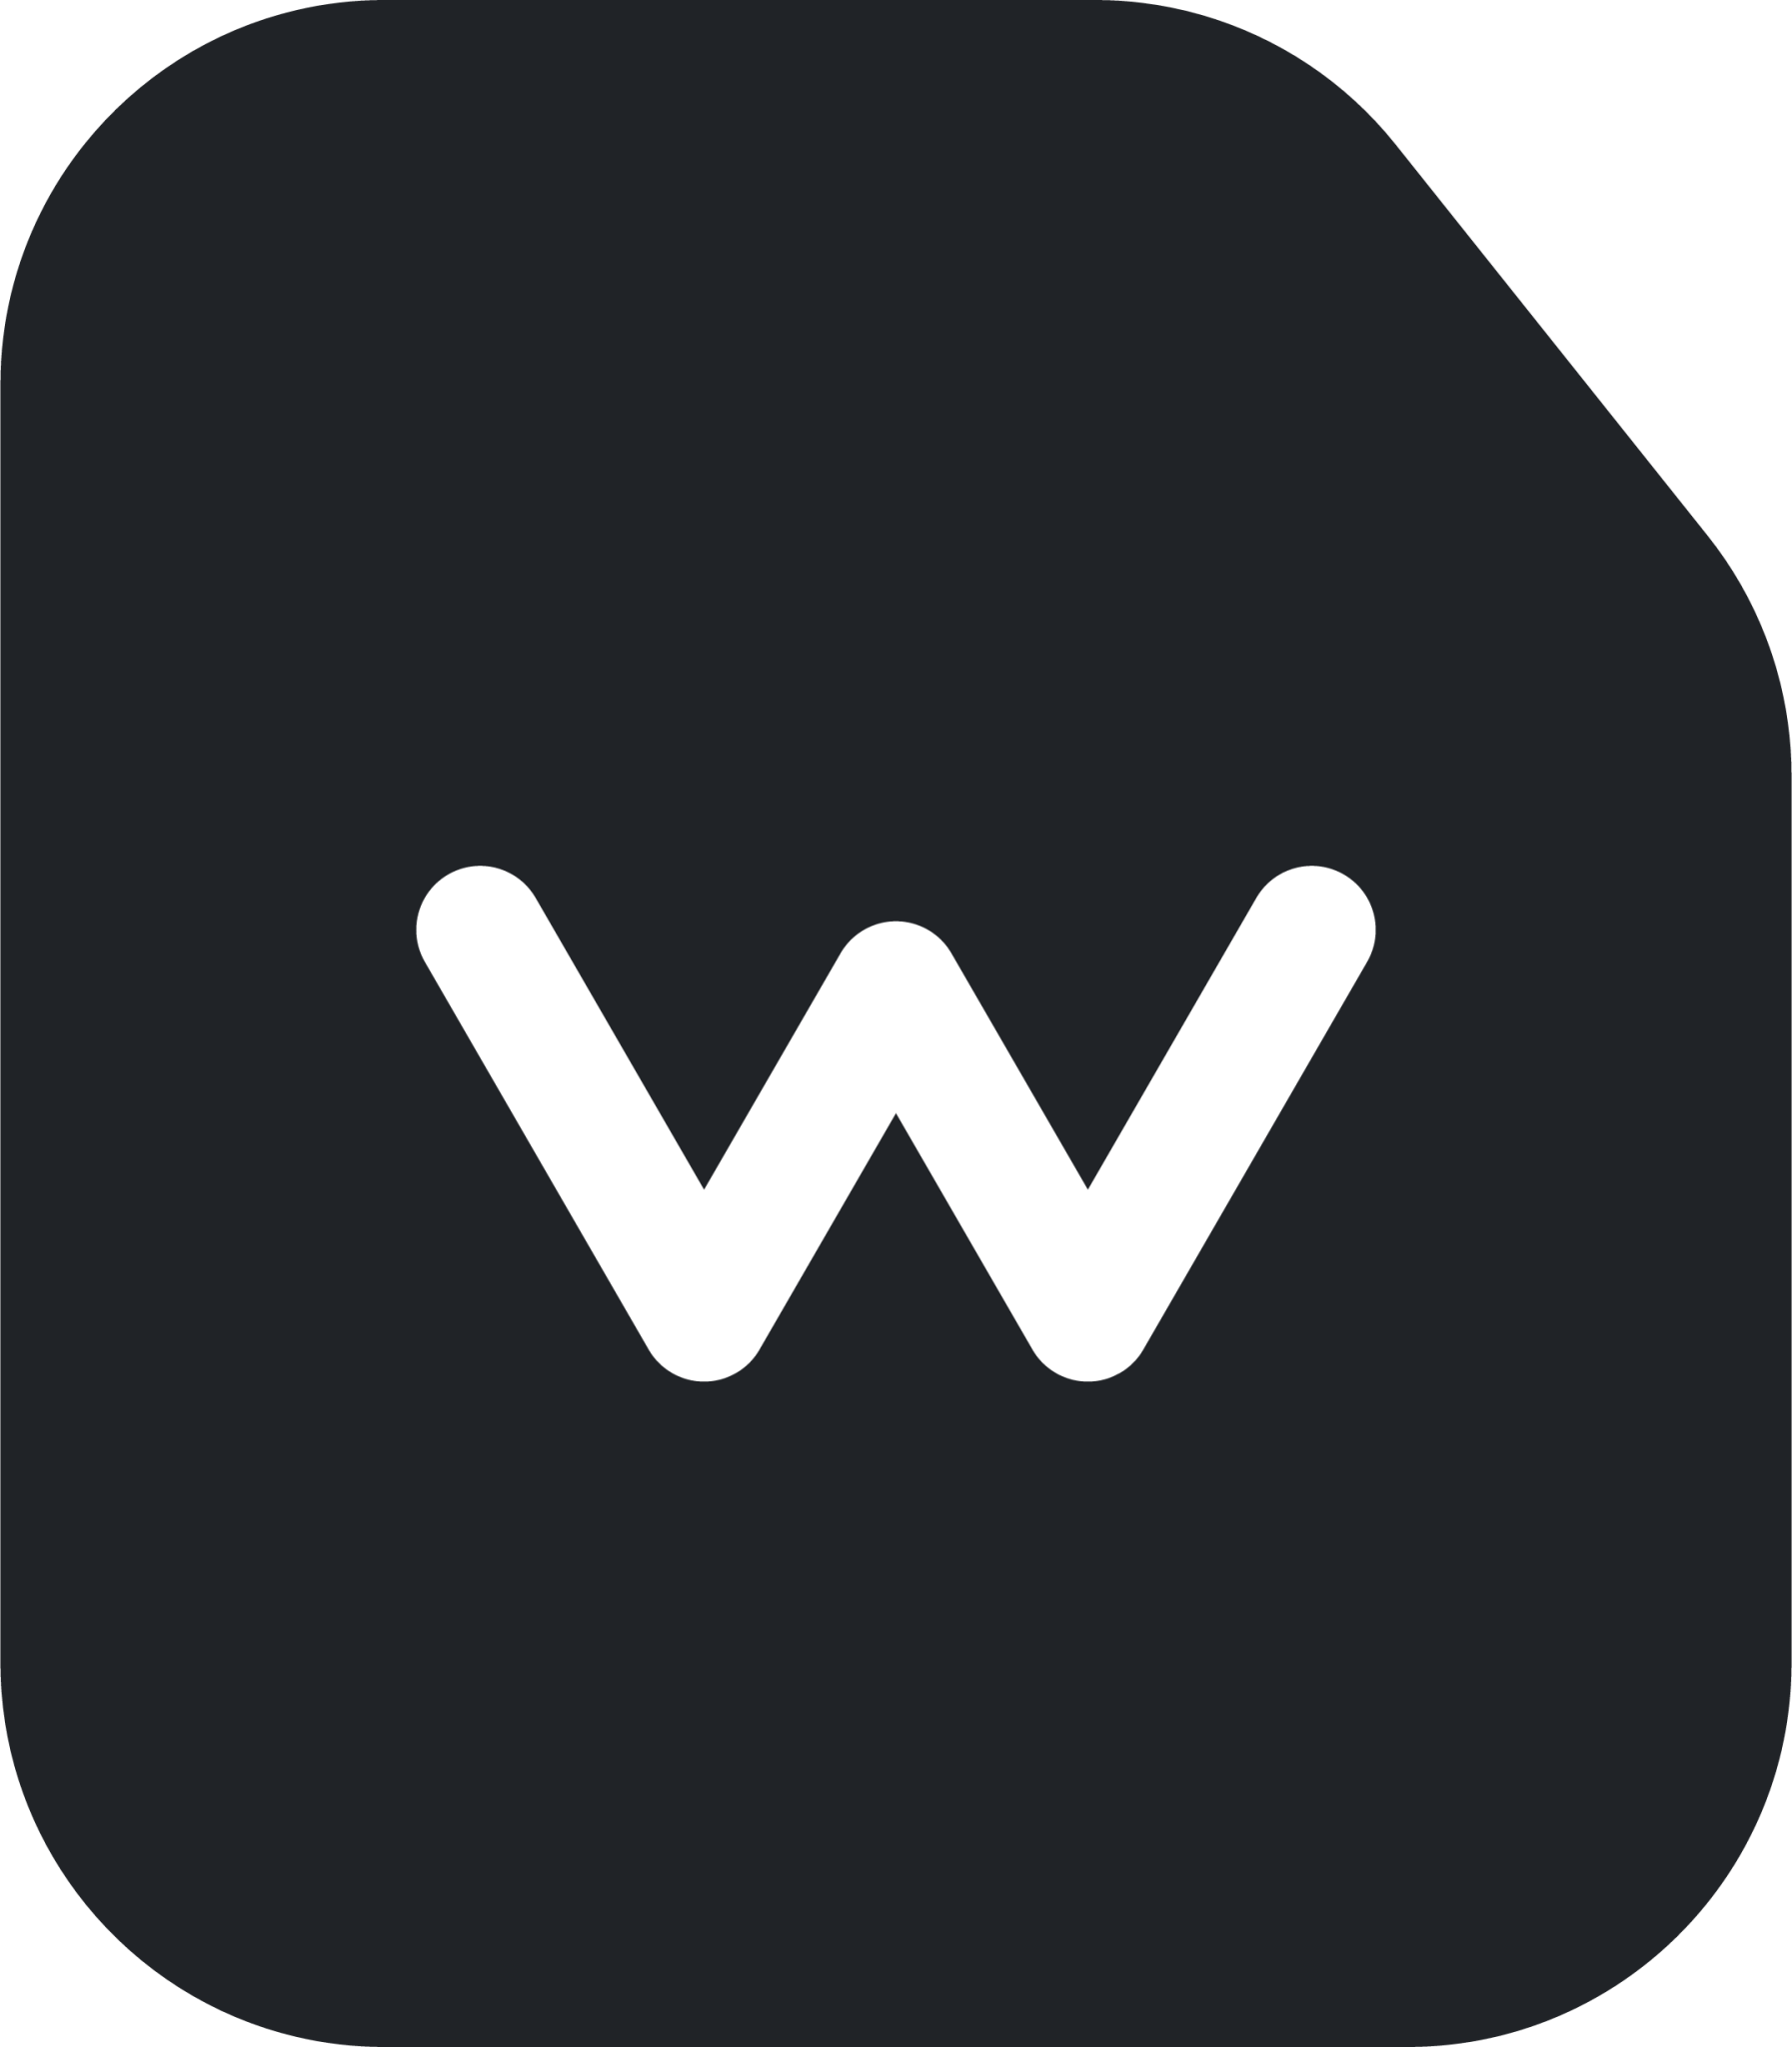 wfile (rounded filled) icon